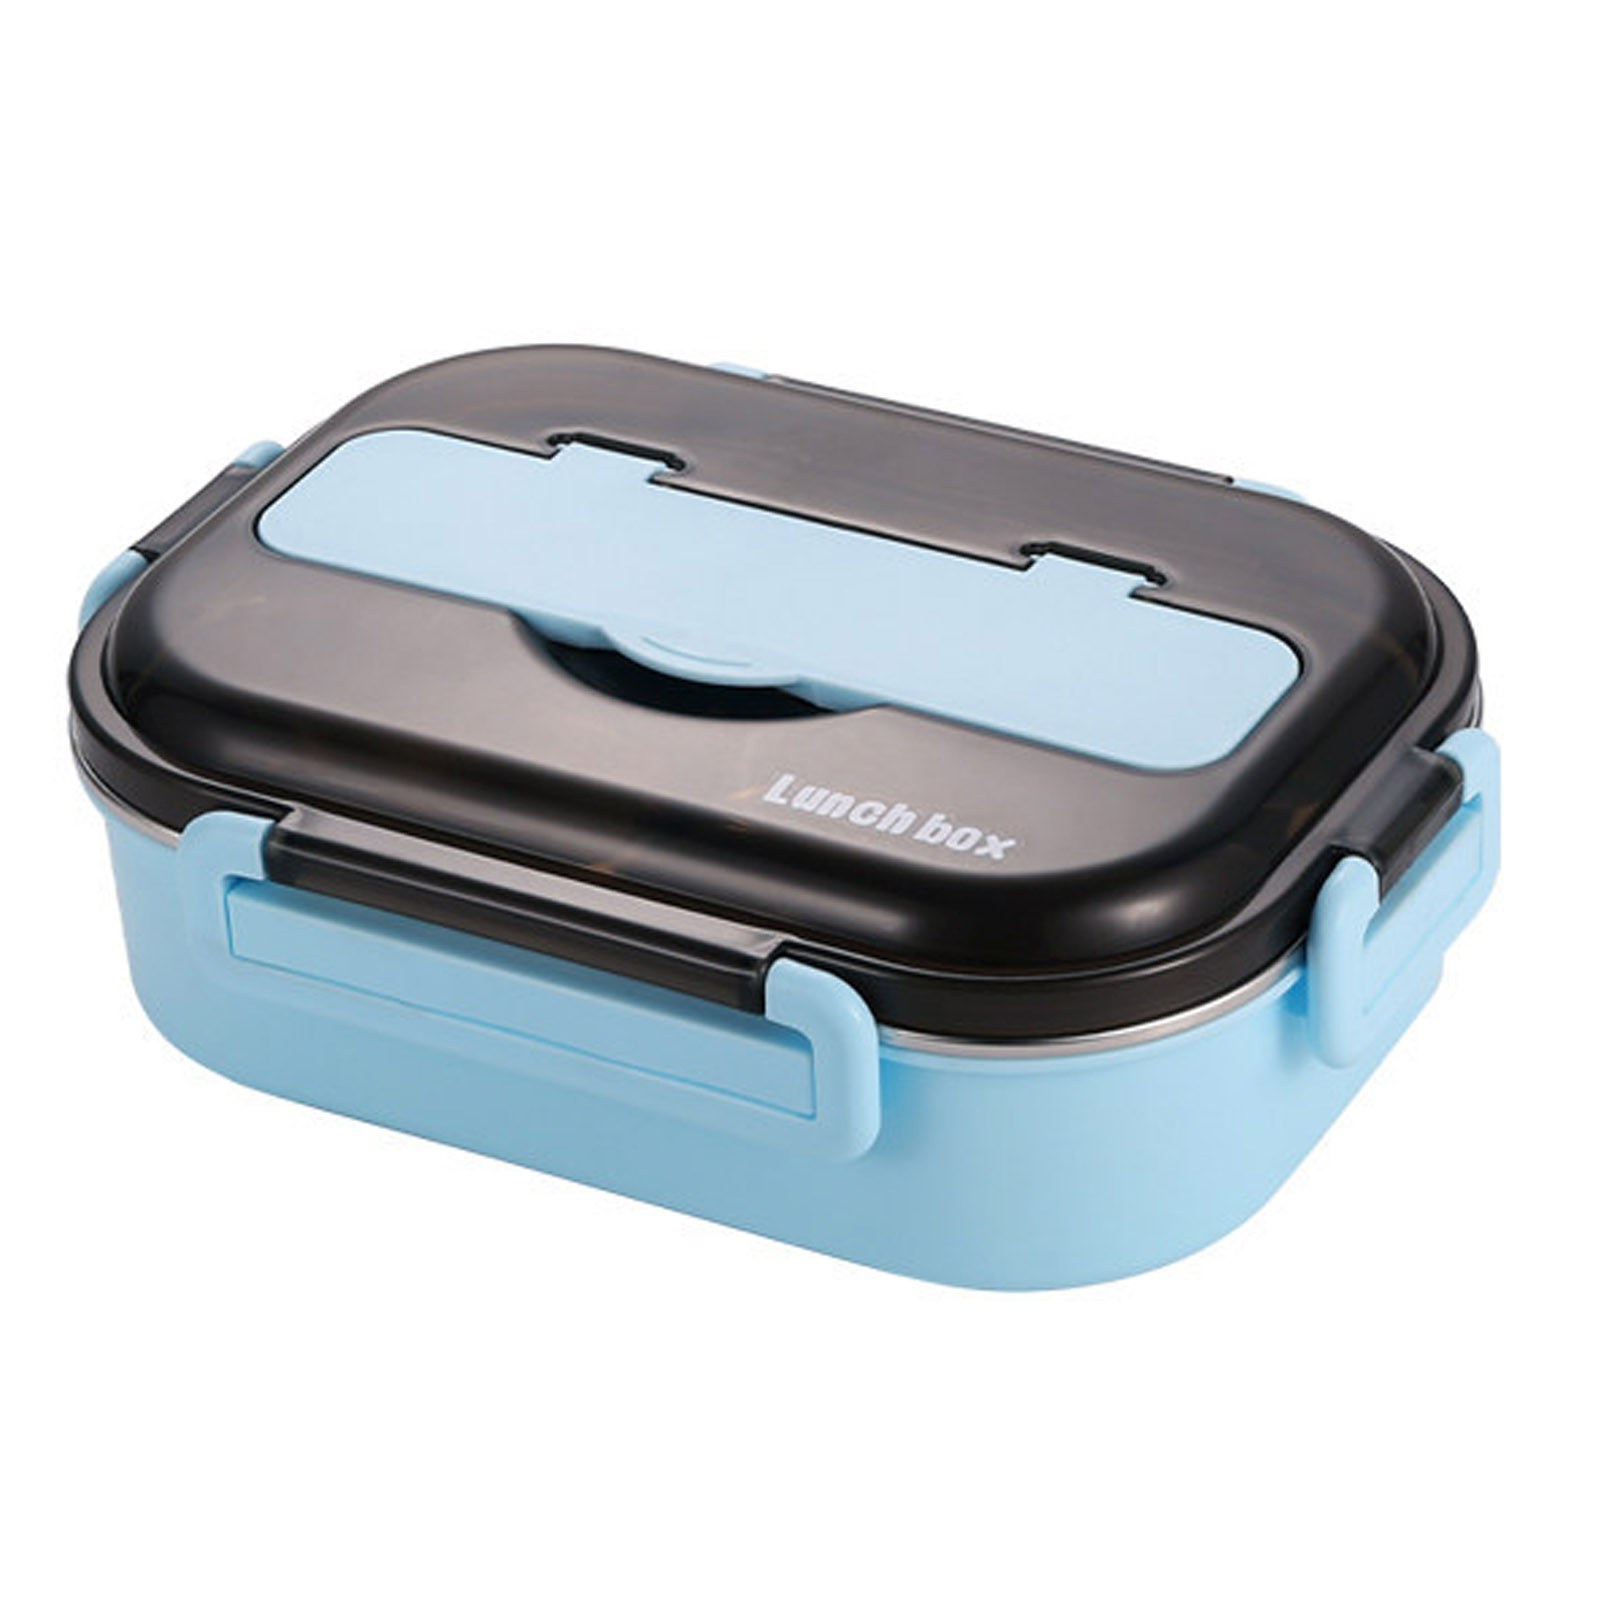 Wovilon 33Oz Stainless Steel Bento Box with Chopsticks and Spoon (Blue), Thermal Insulation Lunch Box with Tableware Set, Lunch Box for Kids, Lunch Containers for Adults,  Student, School and Work - image 2 of 4